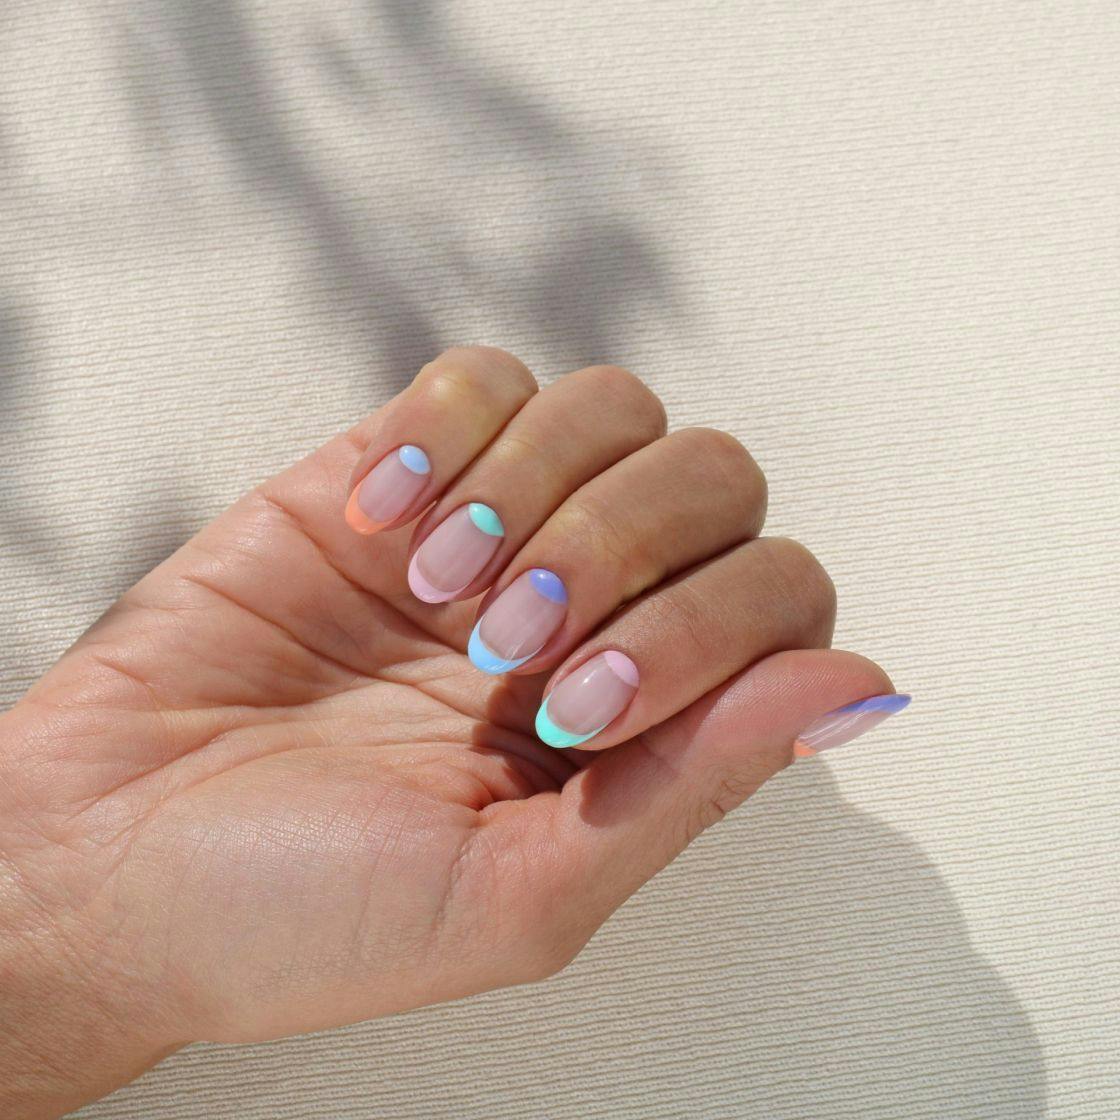 This French manicure alternative is London's most popular design